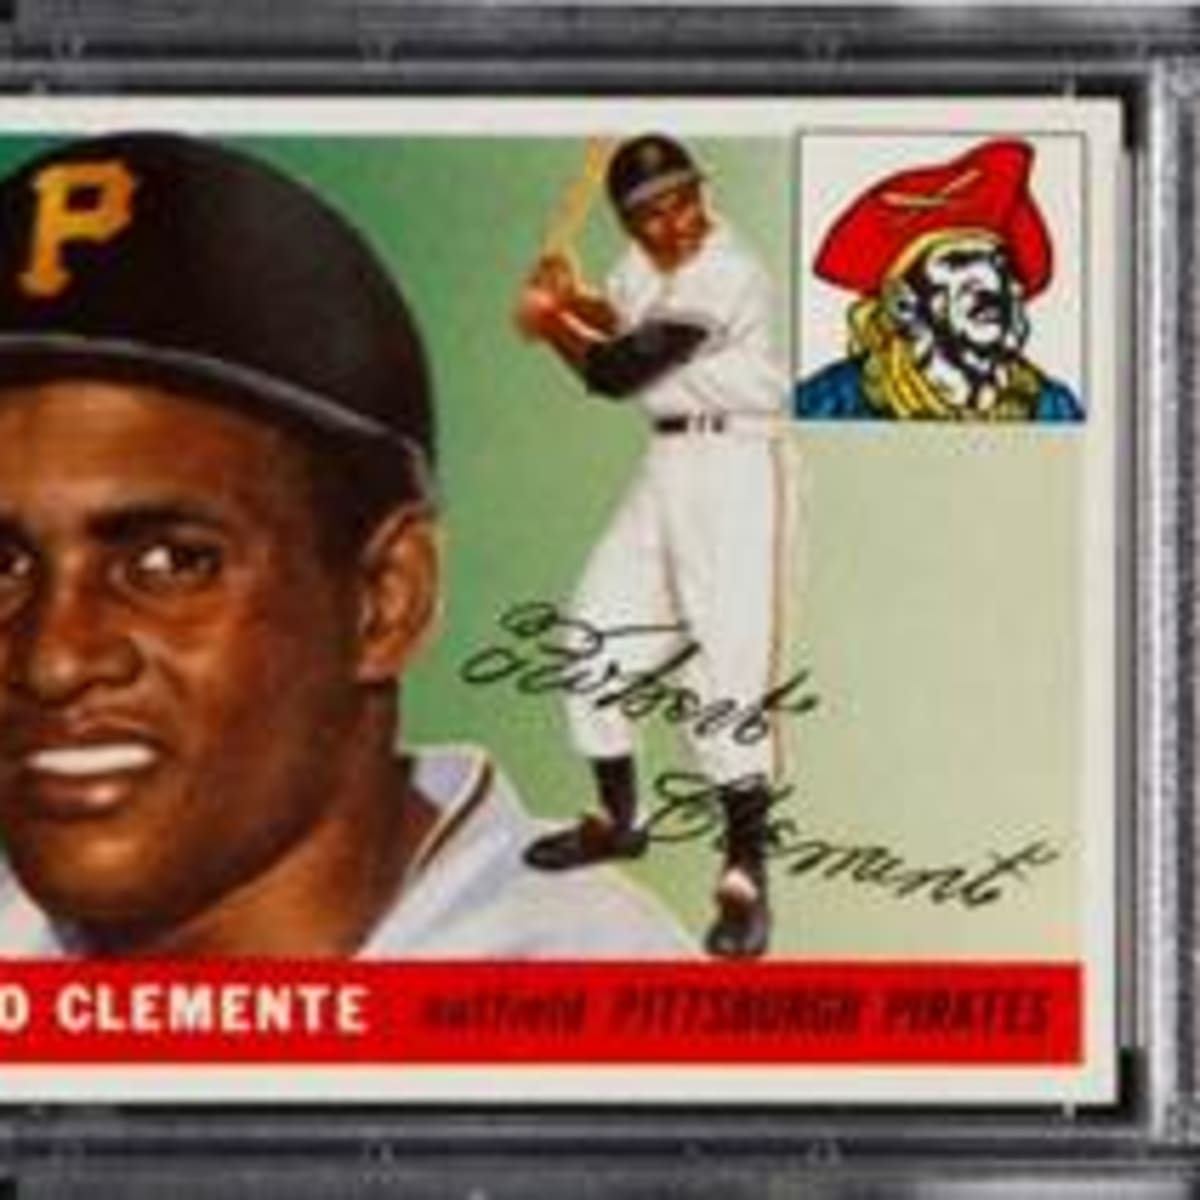 Roberto Clemente rookie card drawing by Thingvold on DeviantArt